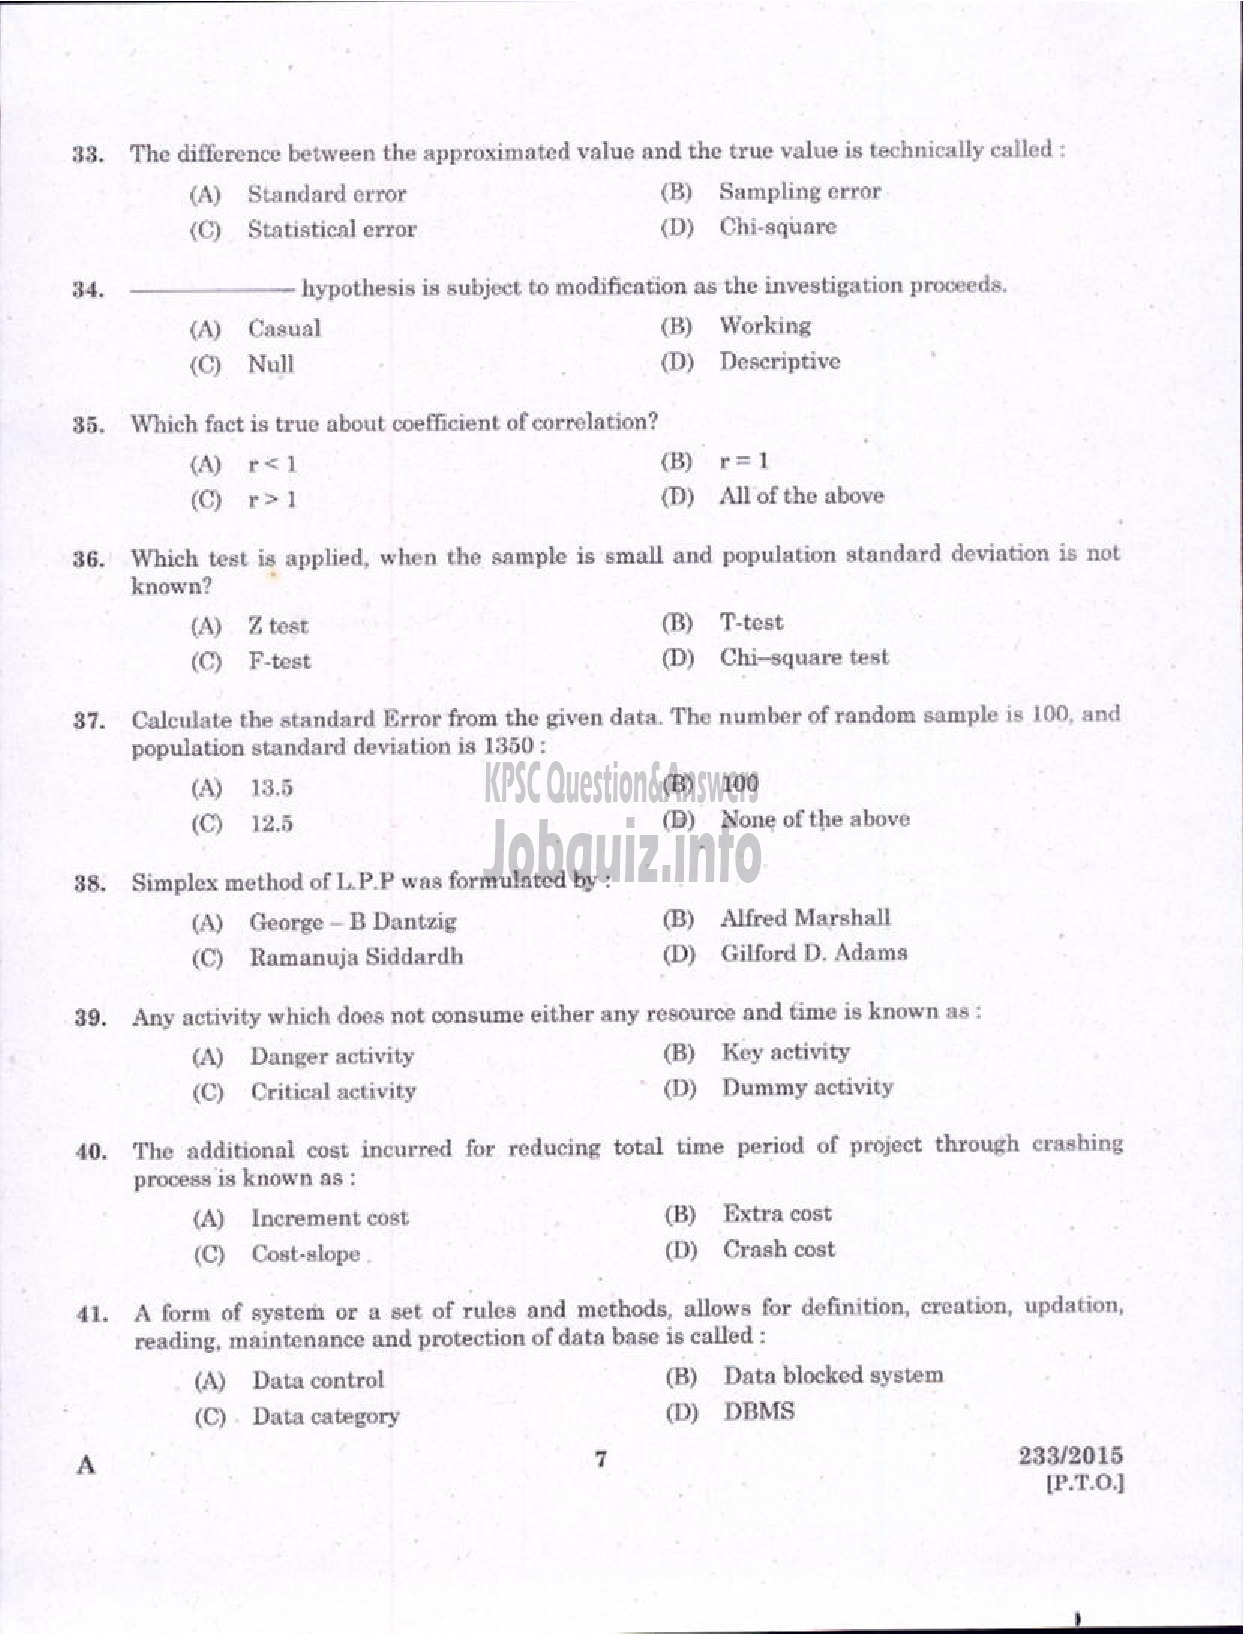 Kerala PSC Question Paper - LECTURER IN COMMERCE TECHNICAL EDUCATION-5